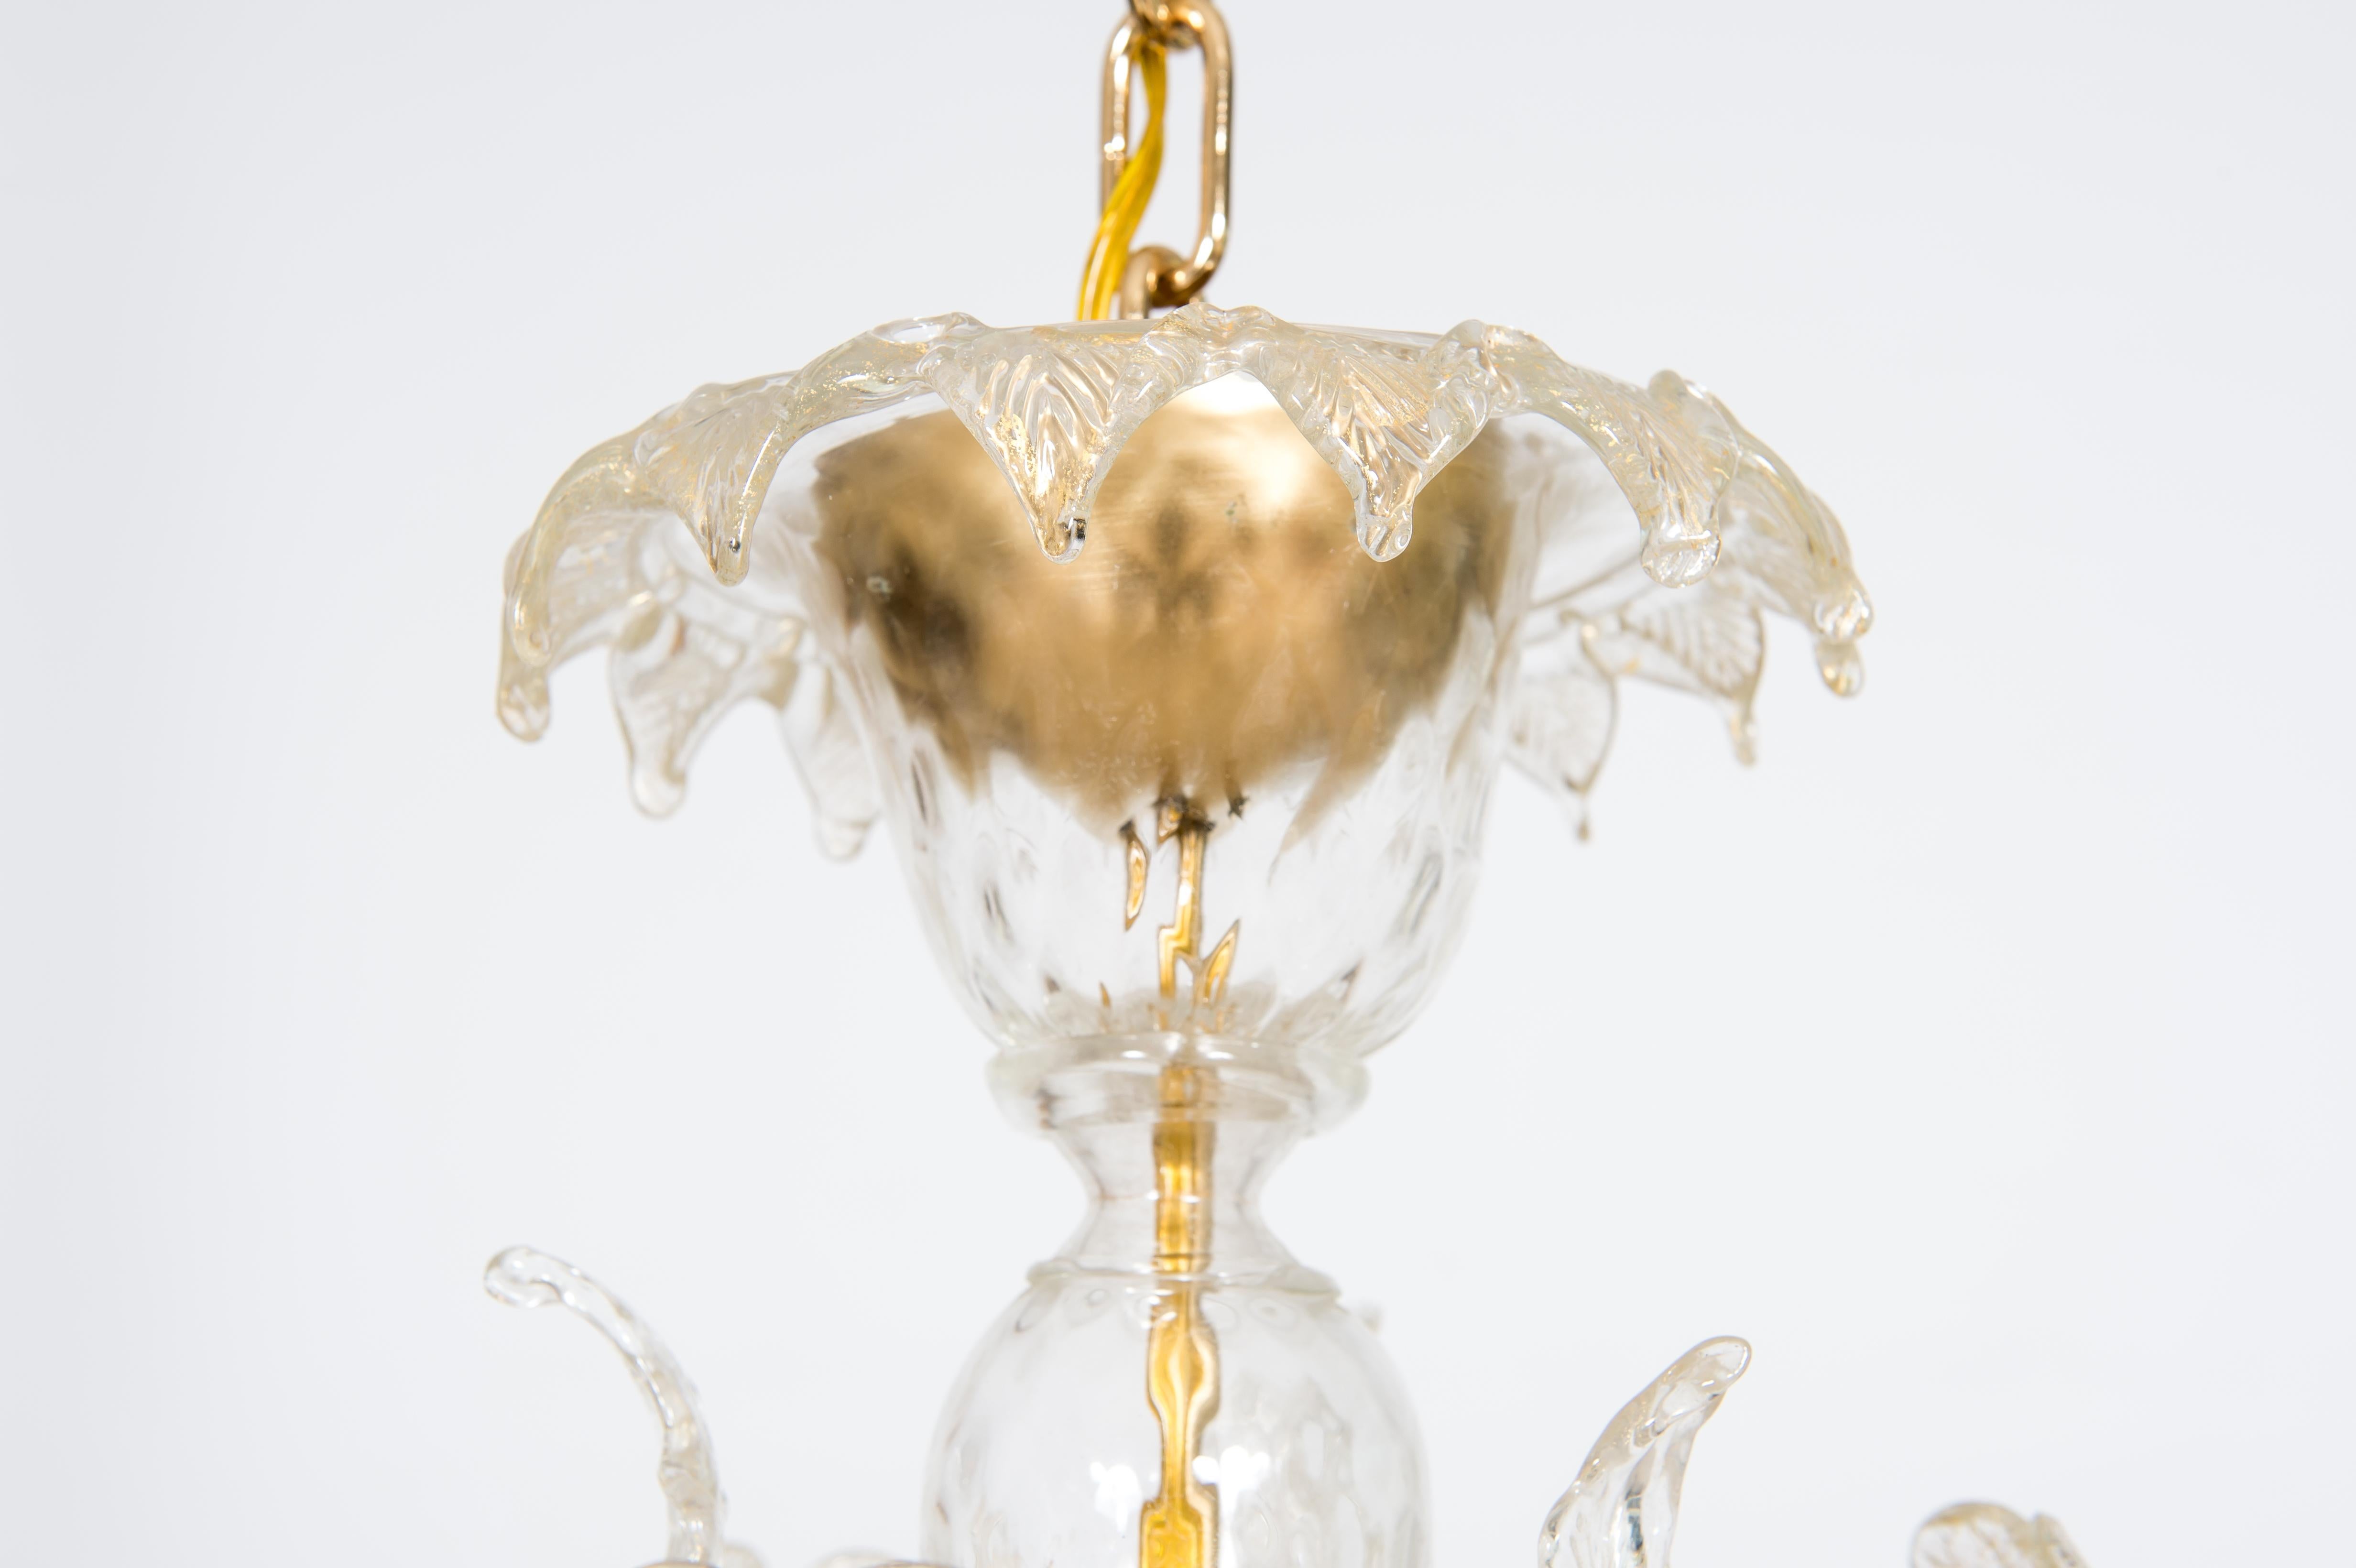 Golden Murano Glass Chandelier with “Vere” Decorations, 20th Century, Italy For Sale 6